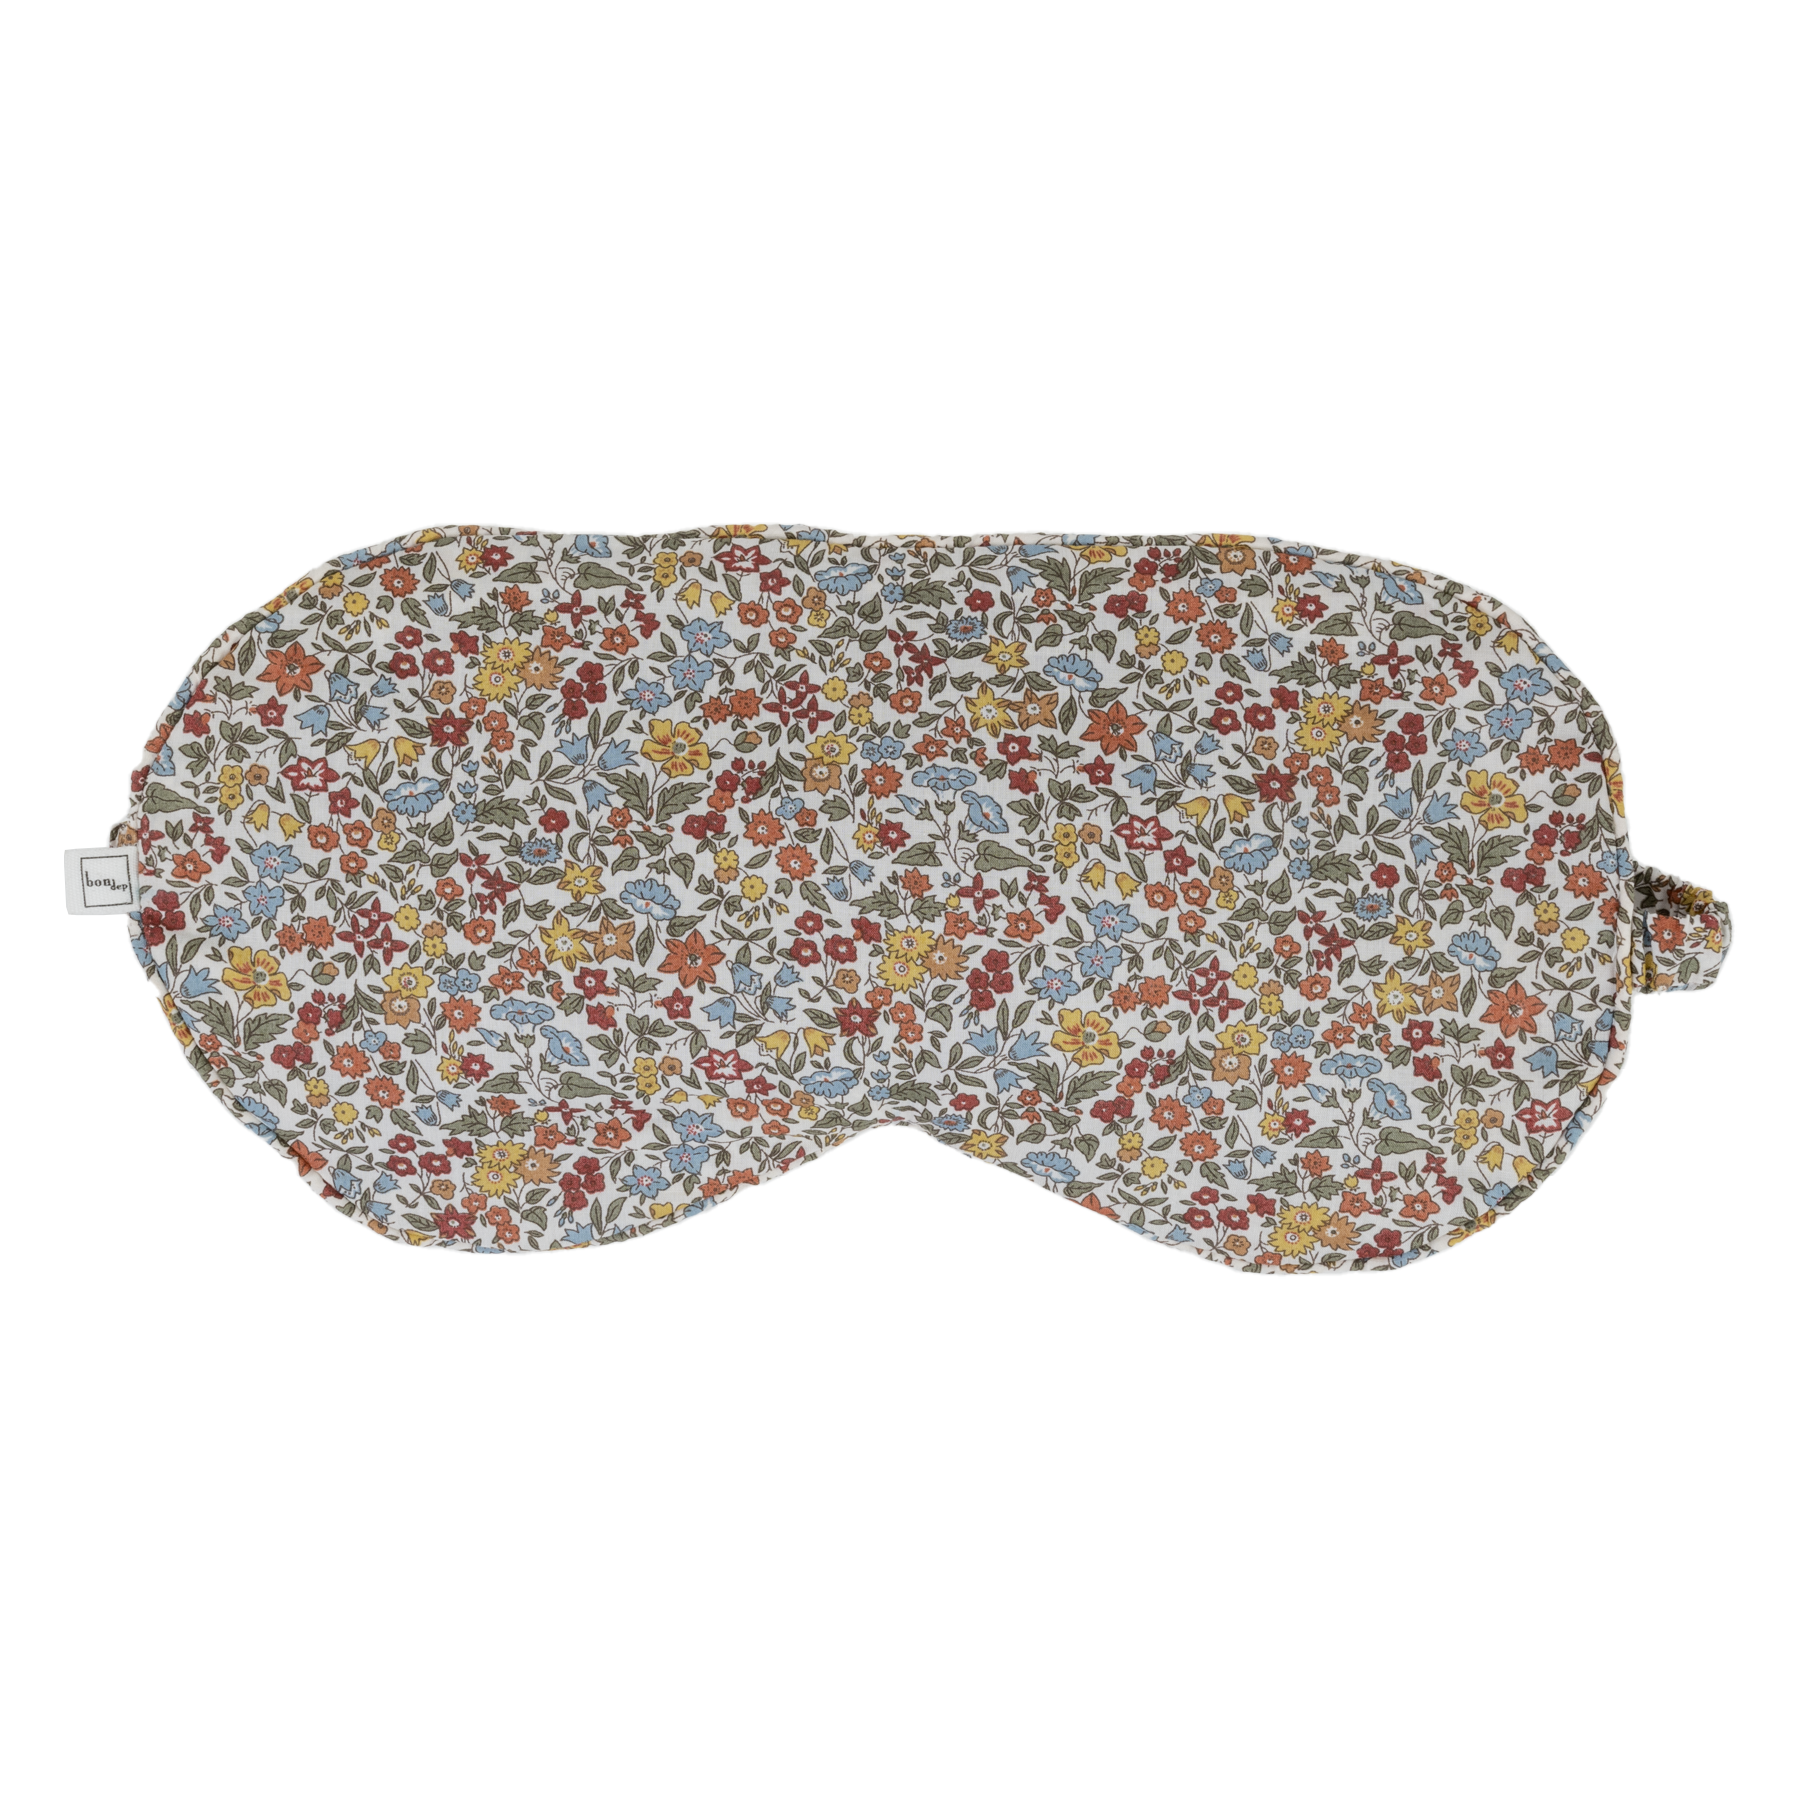 Image of Relaxing Eye masks mw Liberty Ava from Bon Dep Essentials